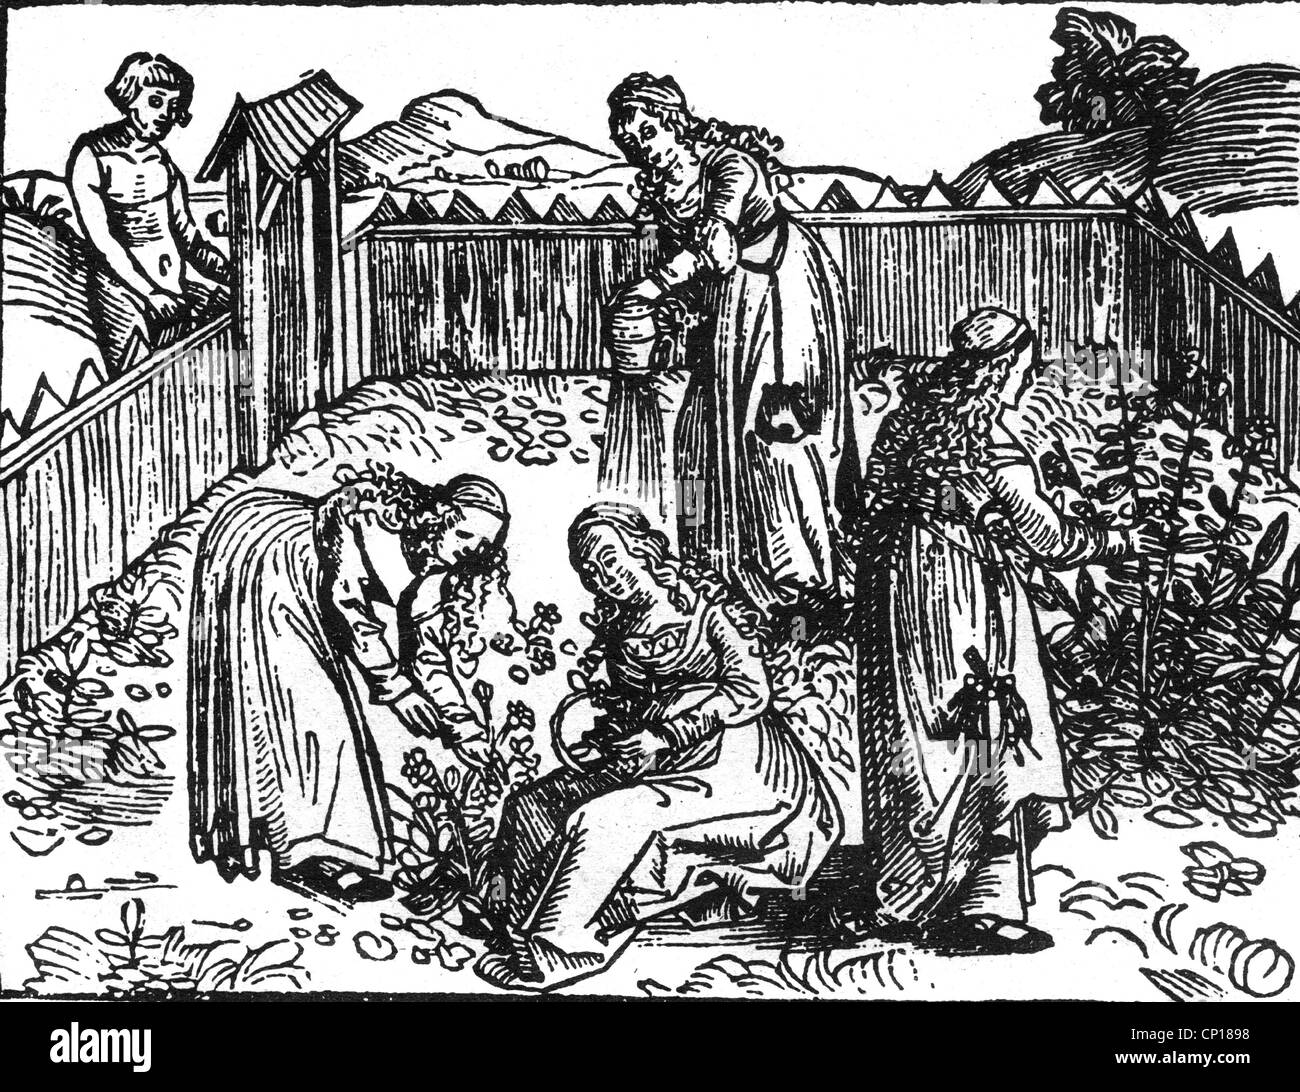 botany, herb, herb garden at monastery, woodcut, 15th century, garden, gardens, nun, nuns, monastic life, Middle Ages, botany, culinary herbs, historic, historical, medieval, people, Additional-Rights-Clearences-Not Available Stock Photo